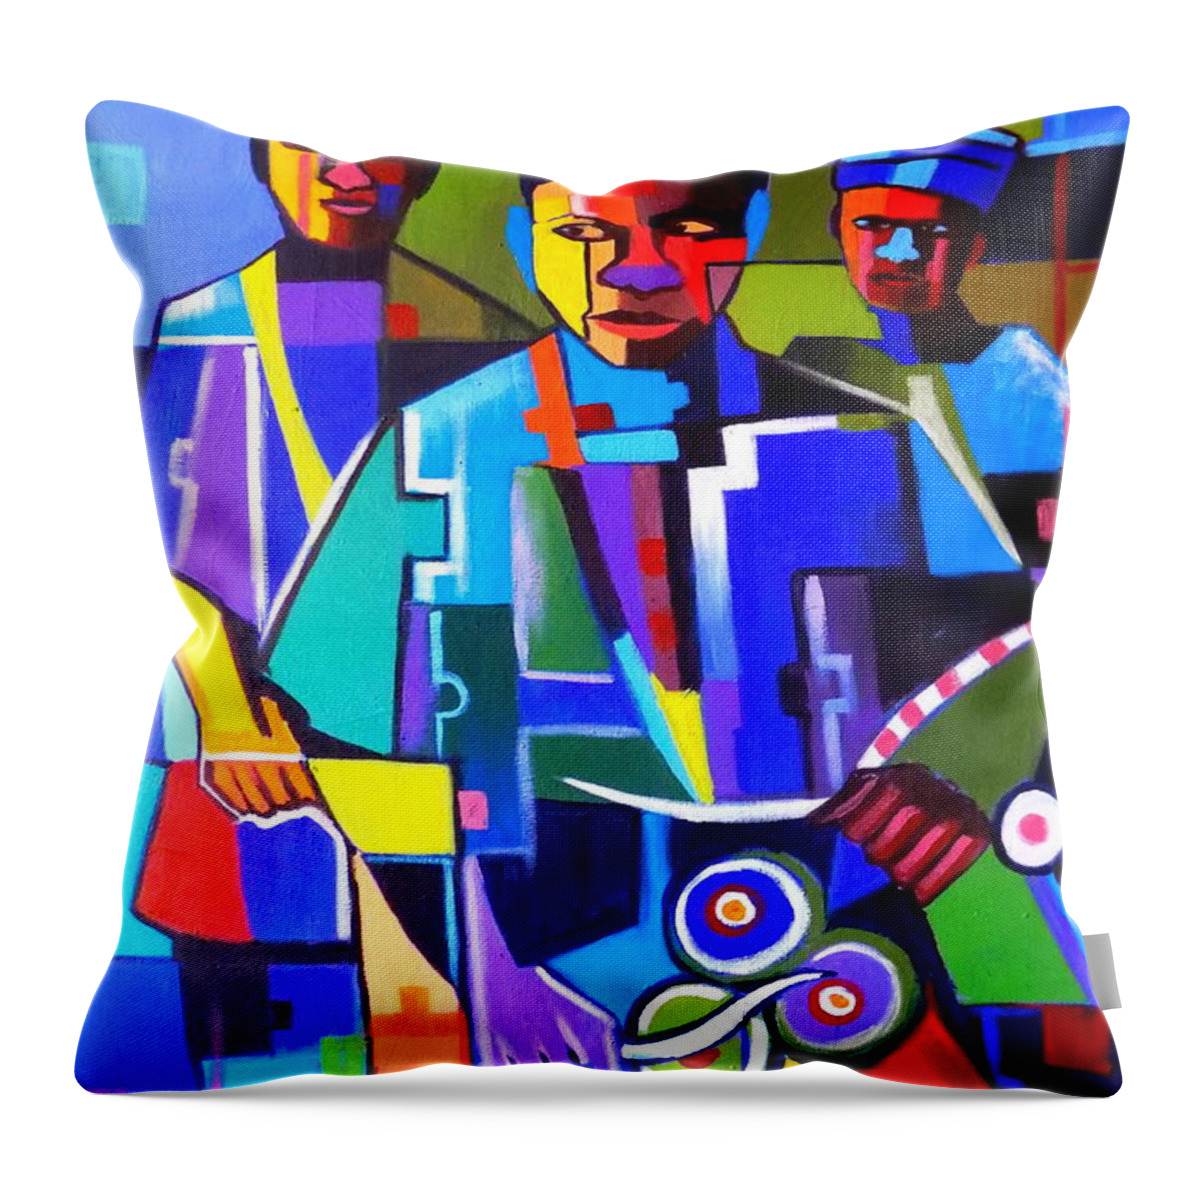 Living Room Throw Pillow featuring the painting Abstract Bata Drummer by Olaoluwa Smith